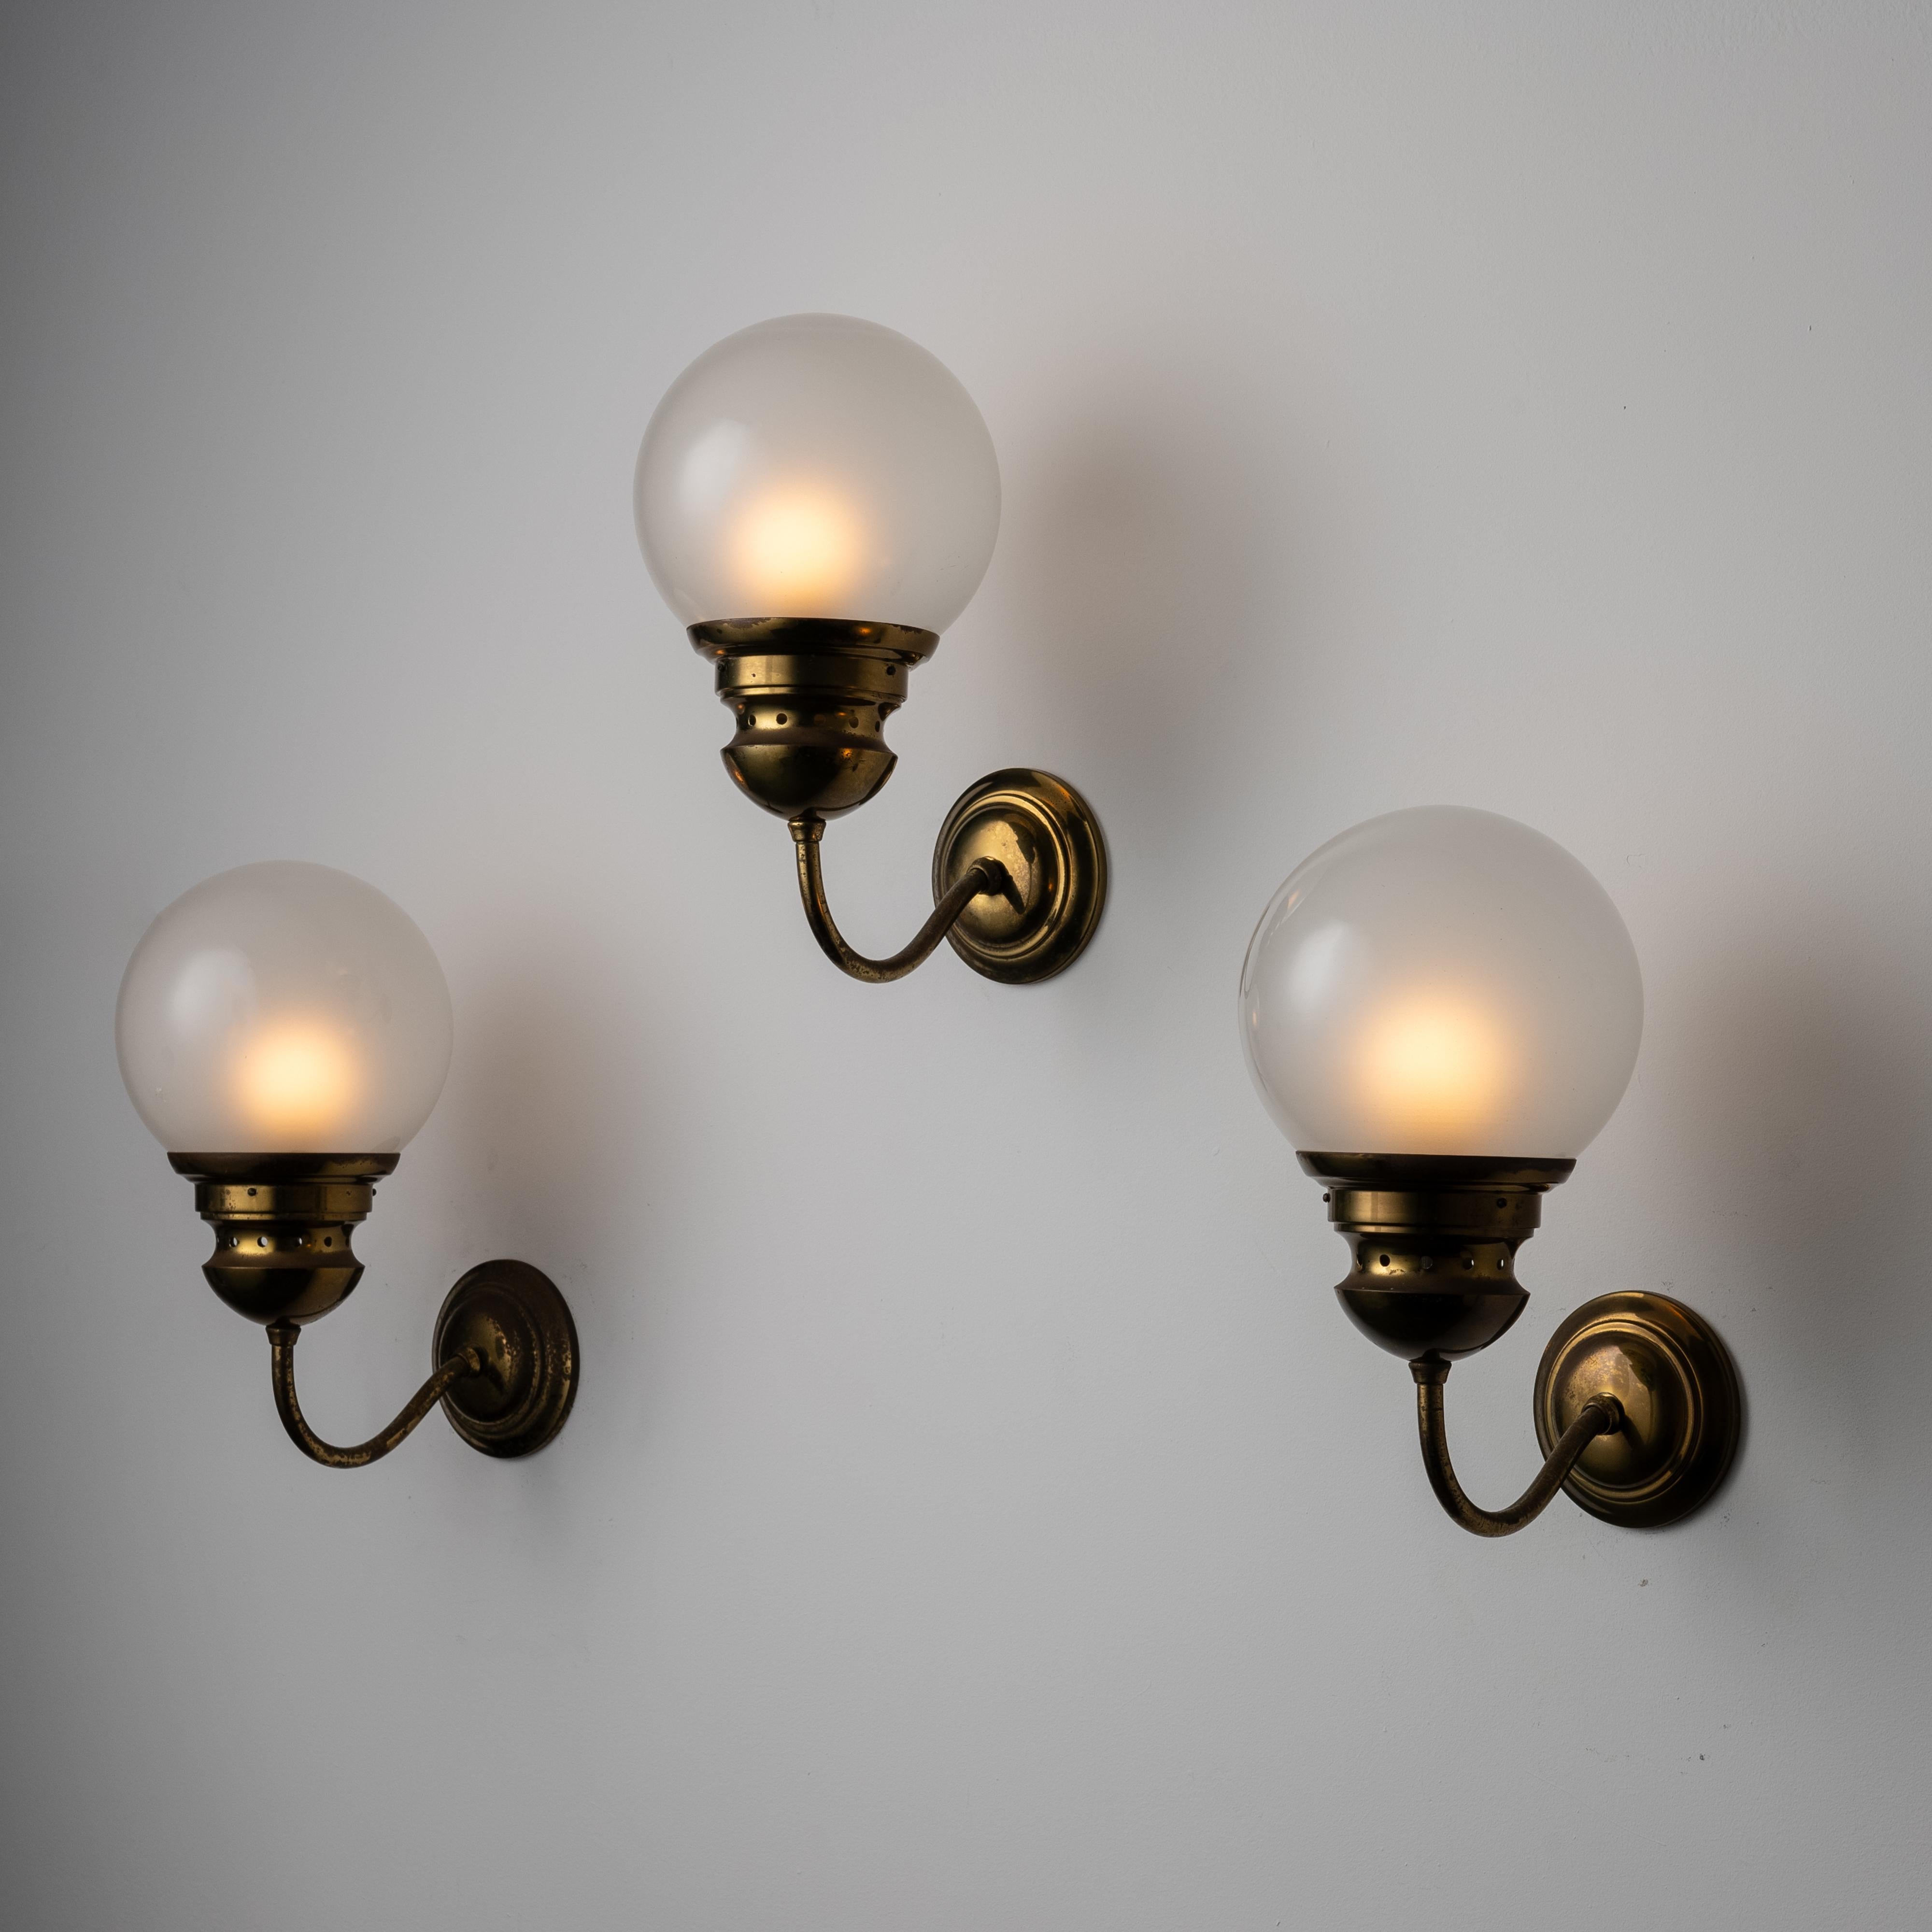 Sconces by Luigi Caccia Dominioni for Azucena. Designed and manufactured in Italy, circa the 1960s. Classical bent arm up-lights comprising of an etched glass globe, sitting atop of a bent brass arm. Each sconce holds a single E27 socket, adapted